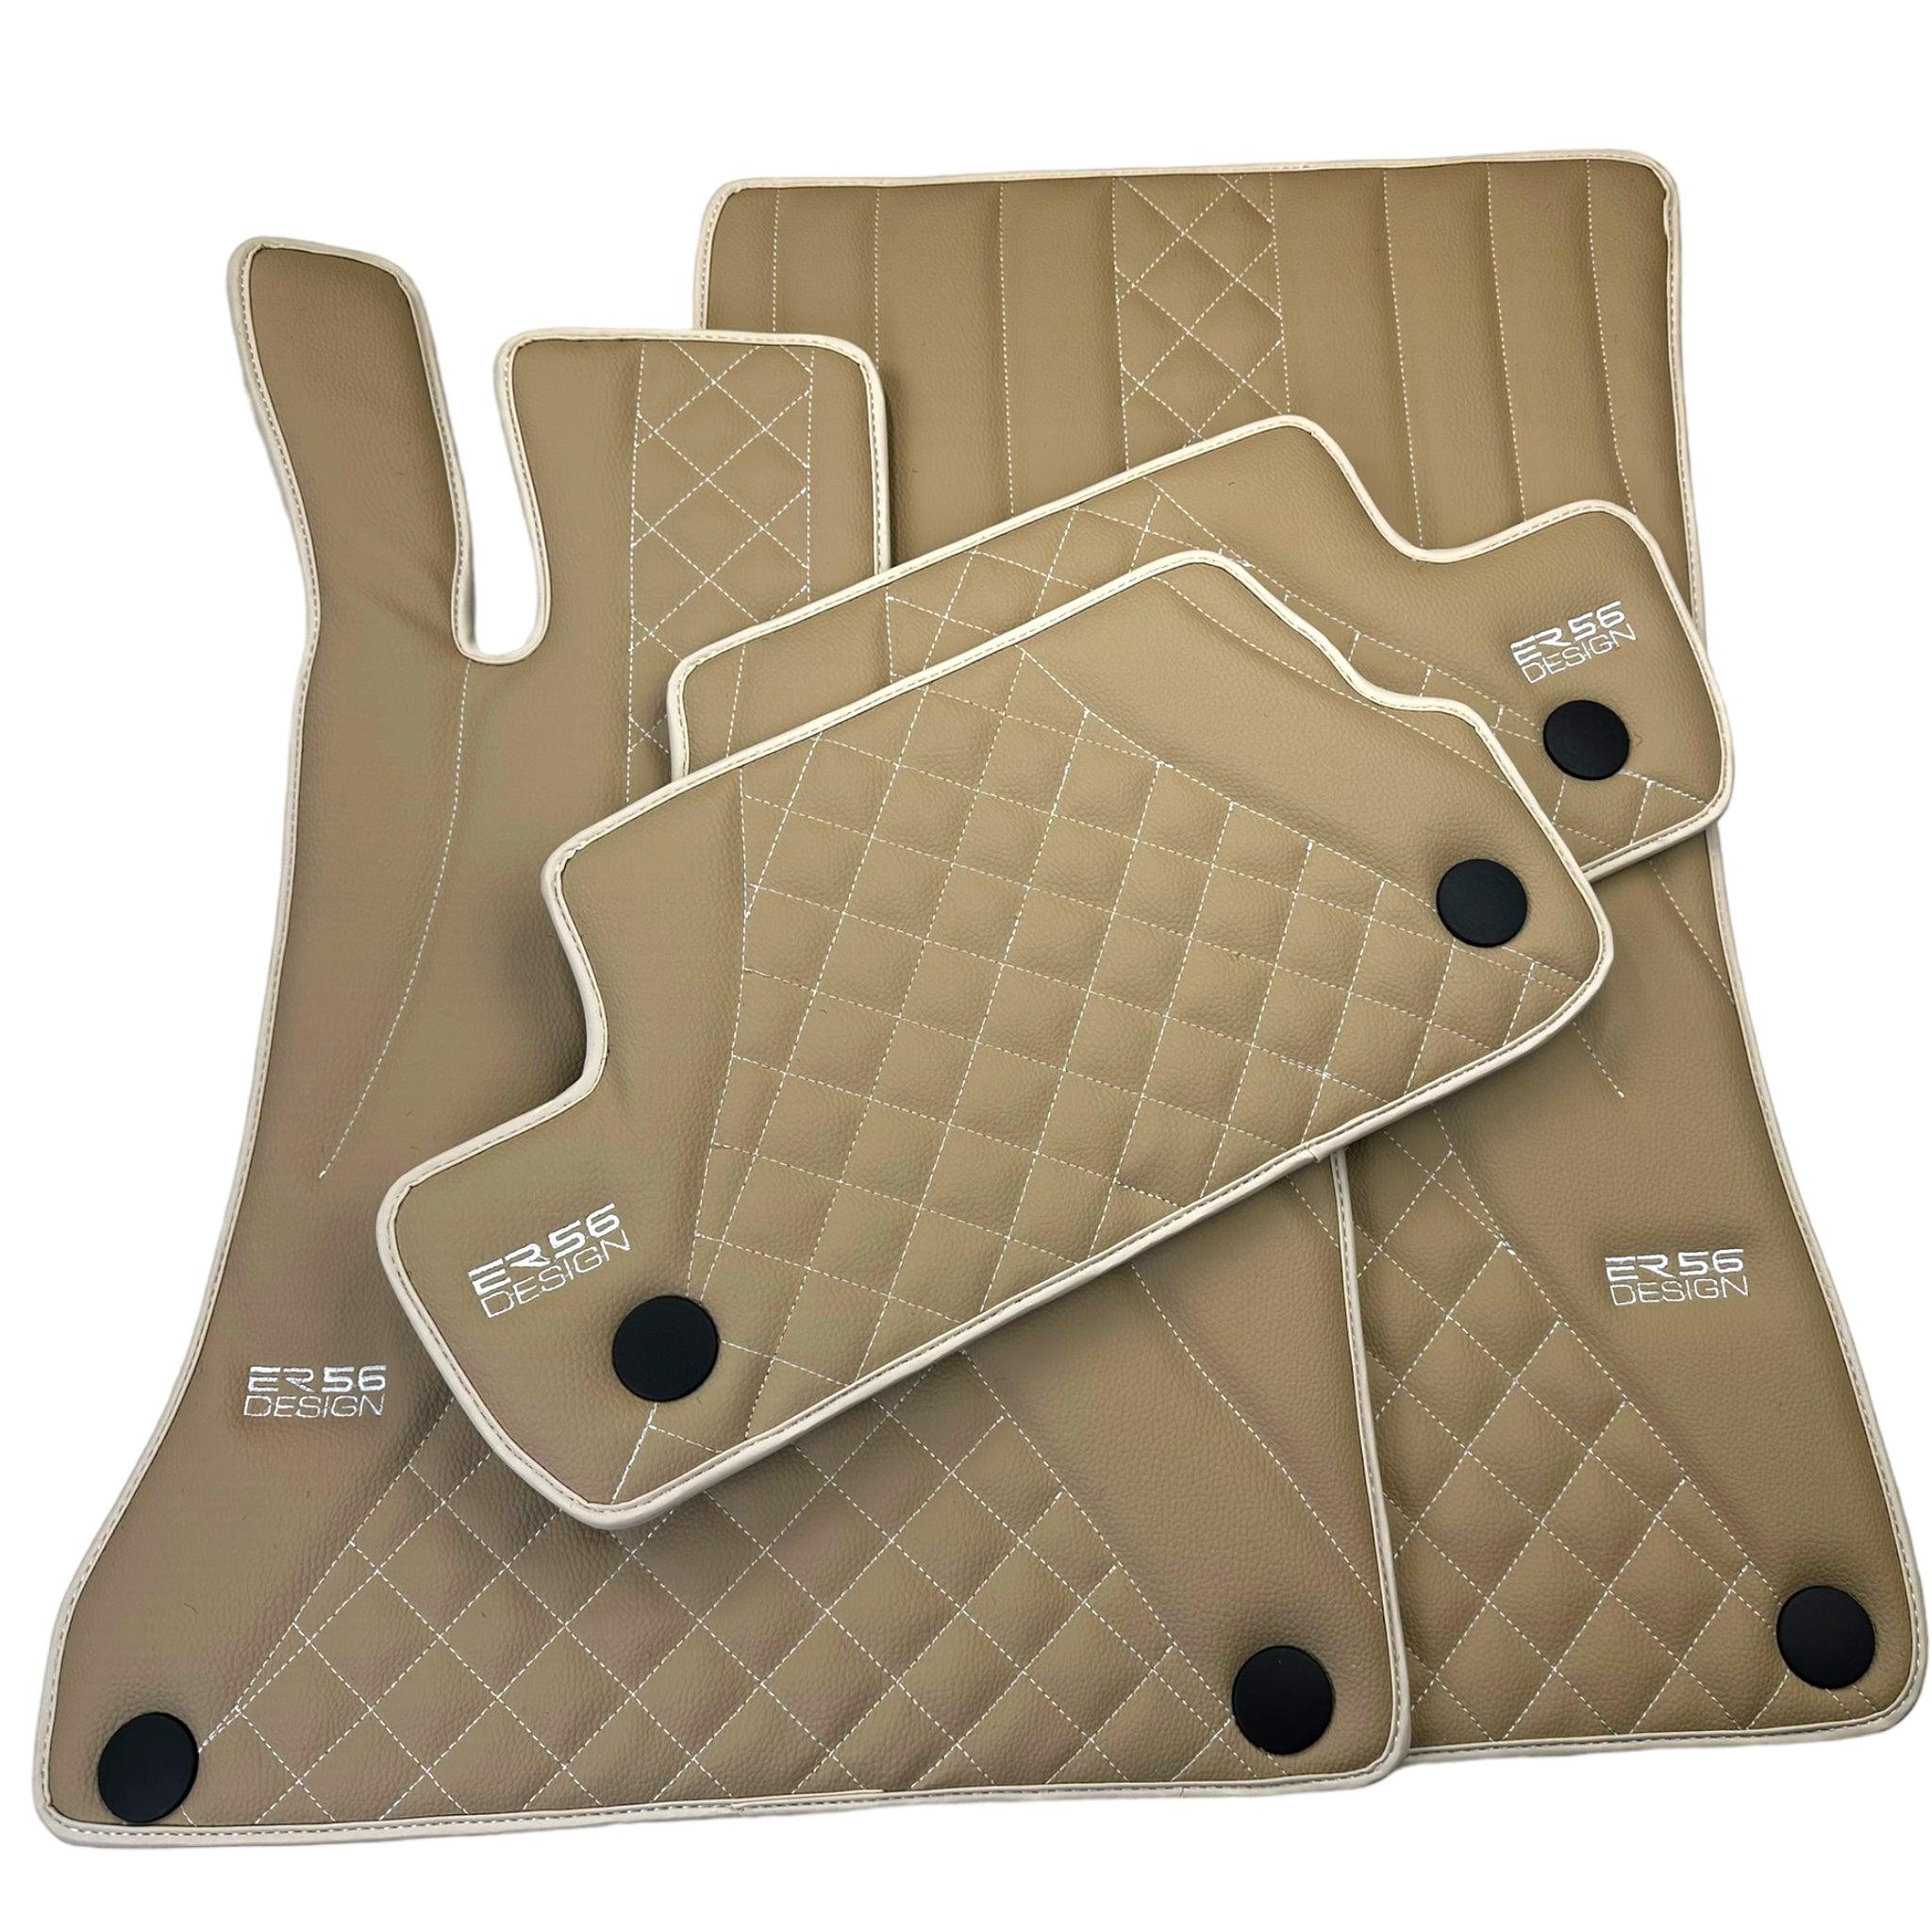 Beige Leather Floor Mats For Mercedes Benz CL-Class C216 Coupe (2006-2013)